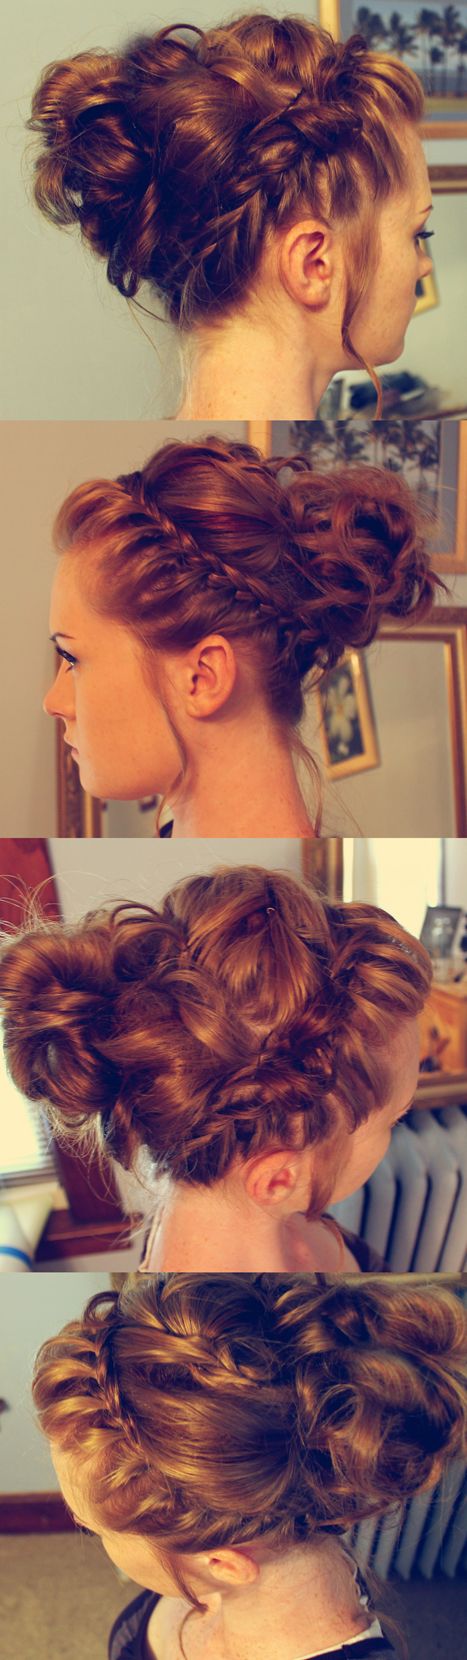 Messy Braided Updo without Bangs